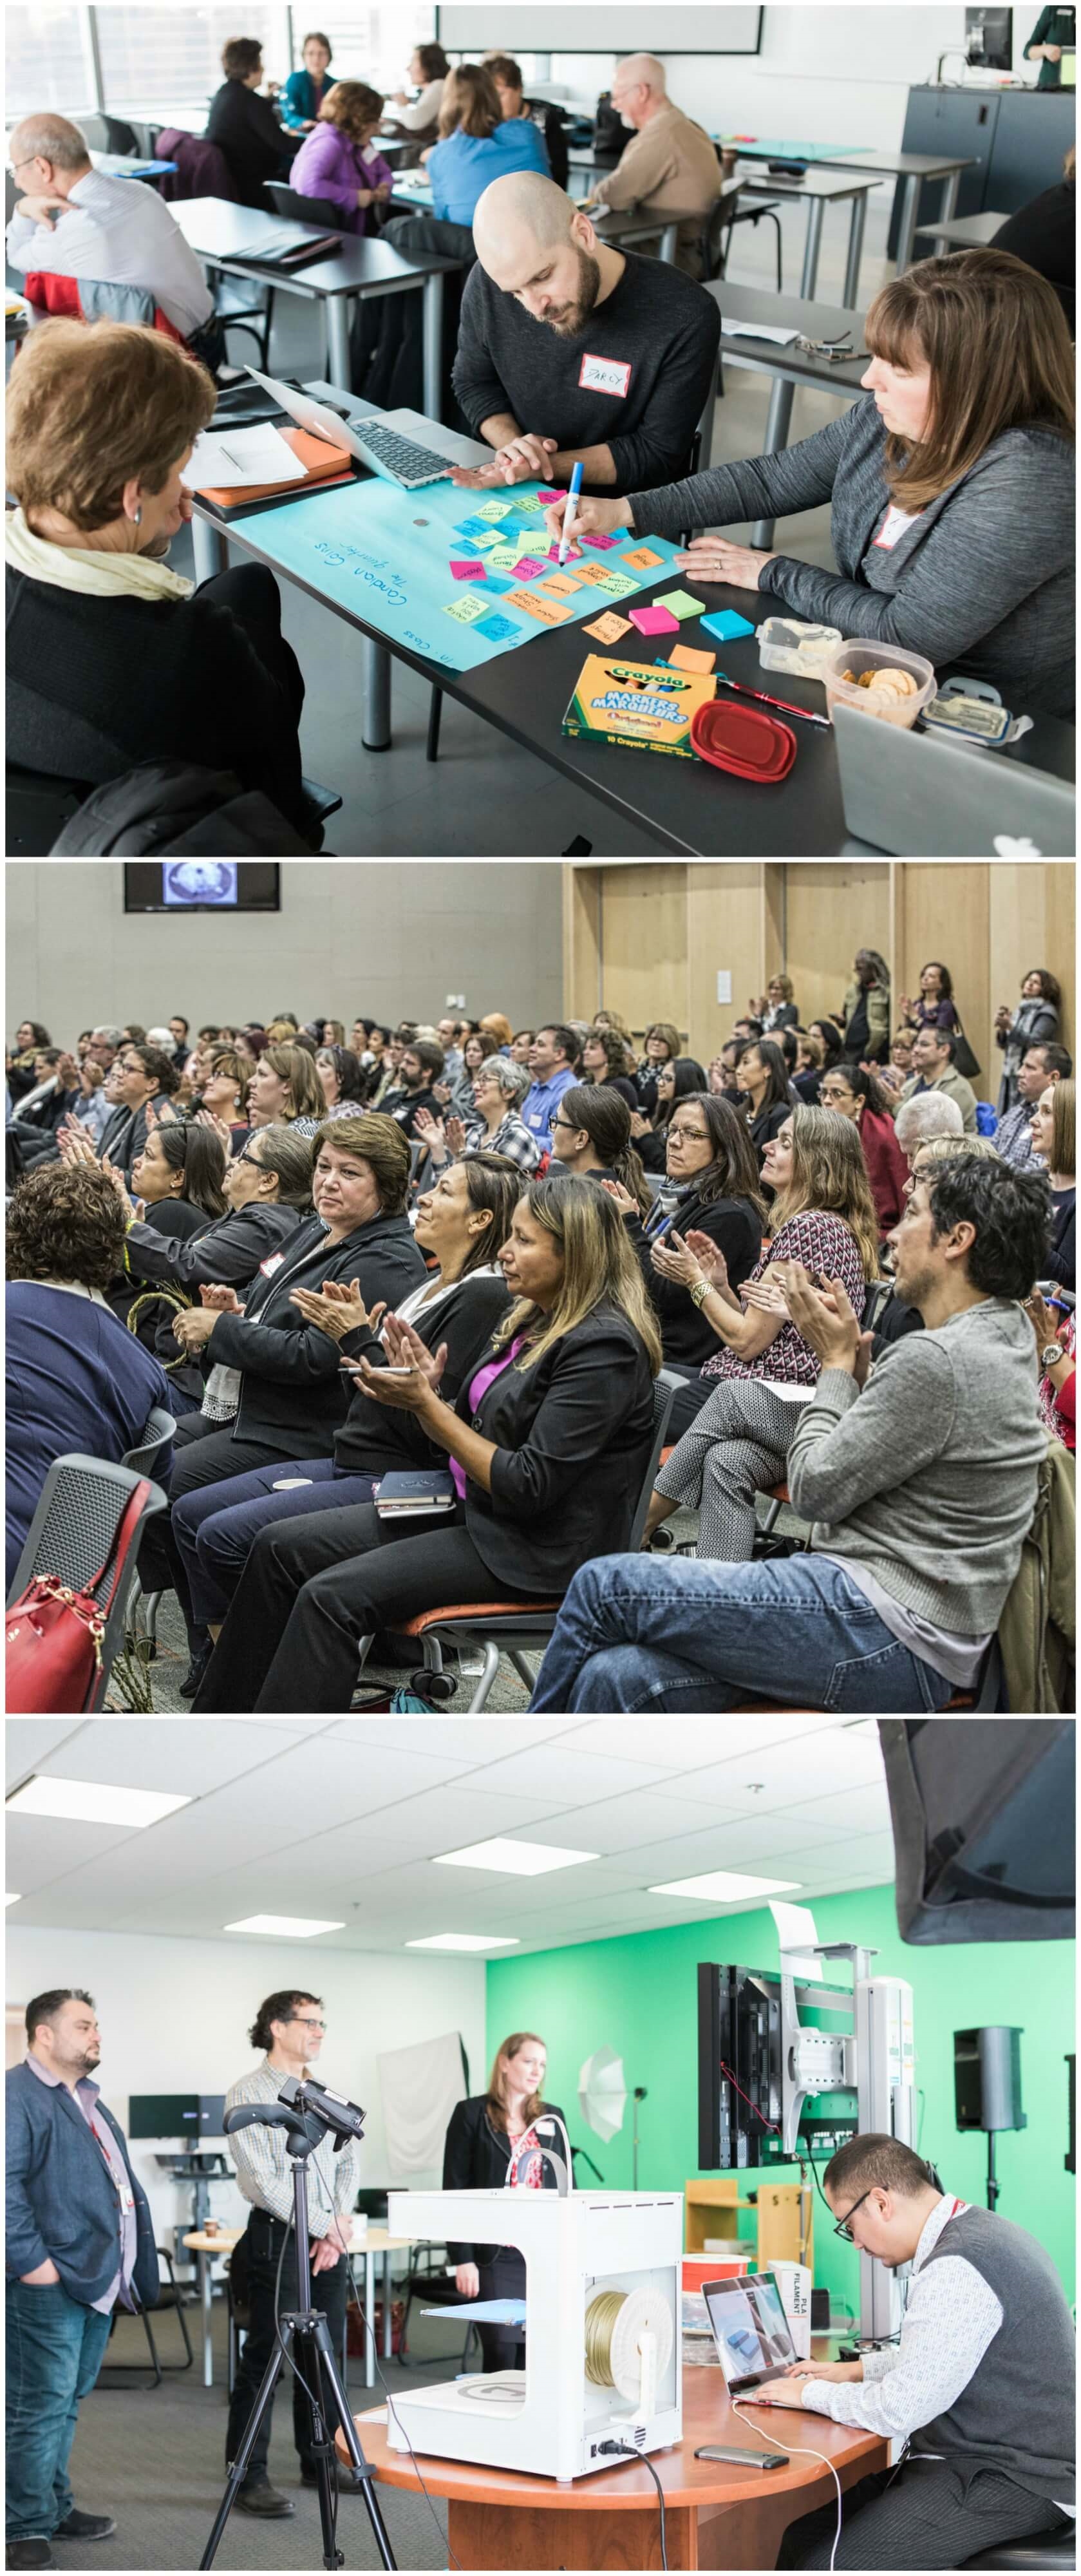 Three images from past Teacing & Learning Days. The top image shows three people in a group collaborating during a breakoutsession; the middle image shows the audience listening to a keynote speaker; the bottom image shows a small group of people observing a demonstration.